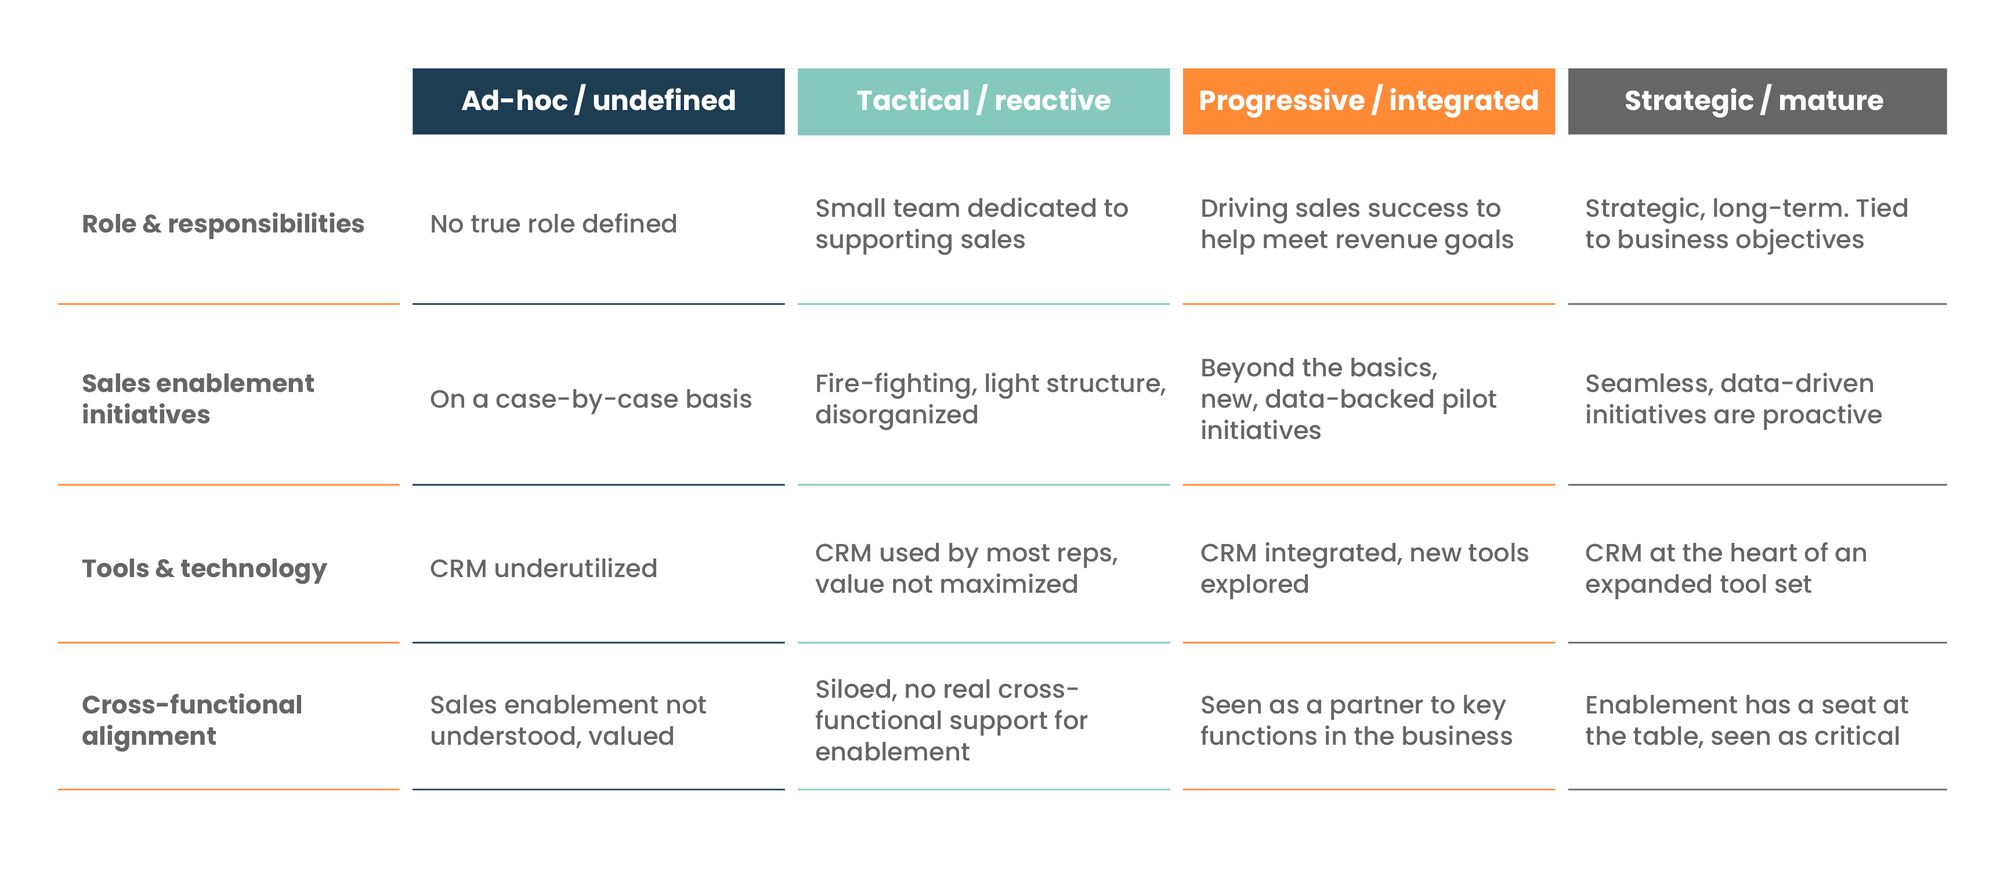 Grid showing the various stages of sales enablement maturity and how the function looks at each stage.